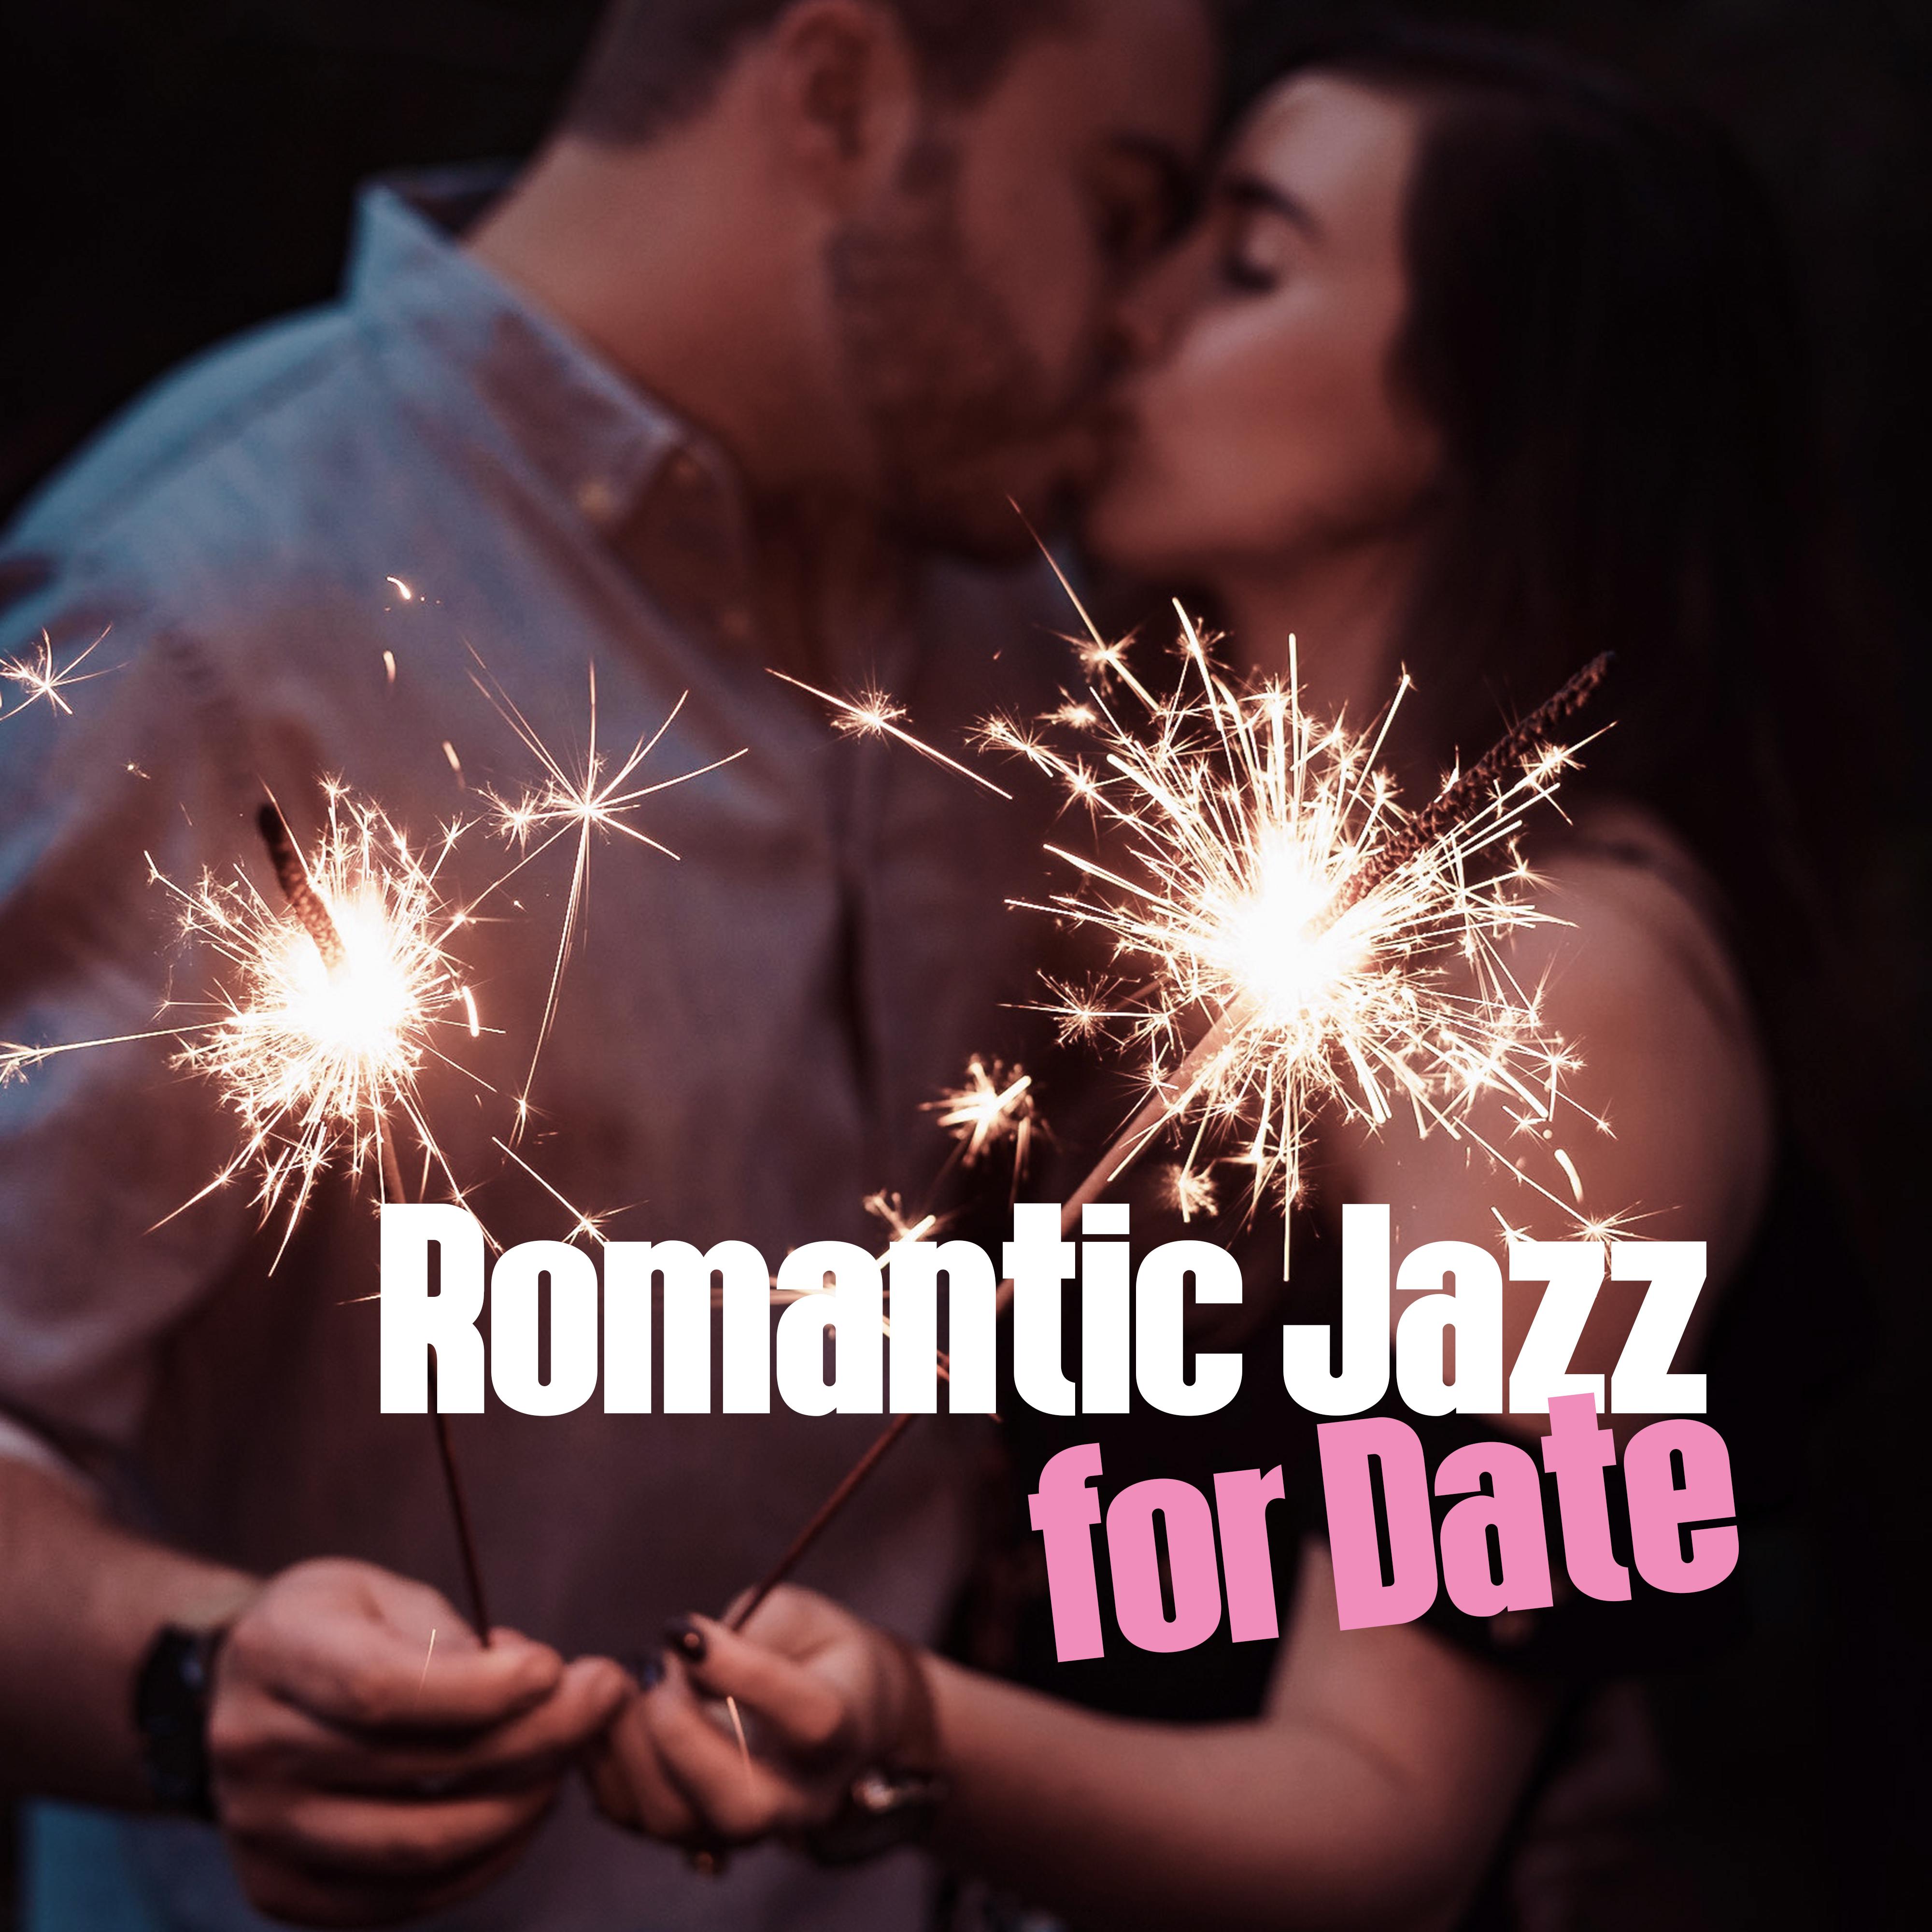 Romantic Jazz for Date  Sensual Note for Lovers, Jazz Music, Smooth Night Songs, Moonlight Jazz